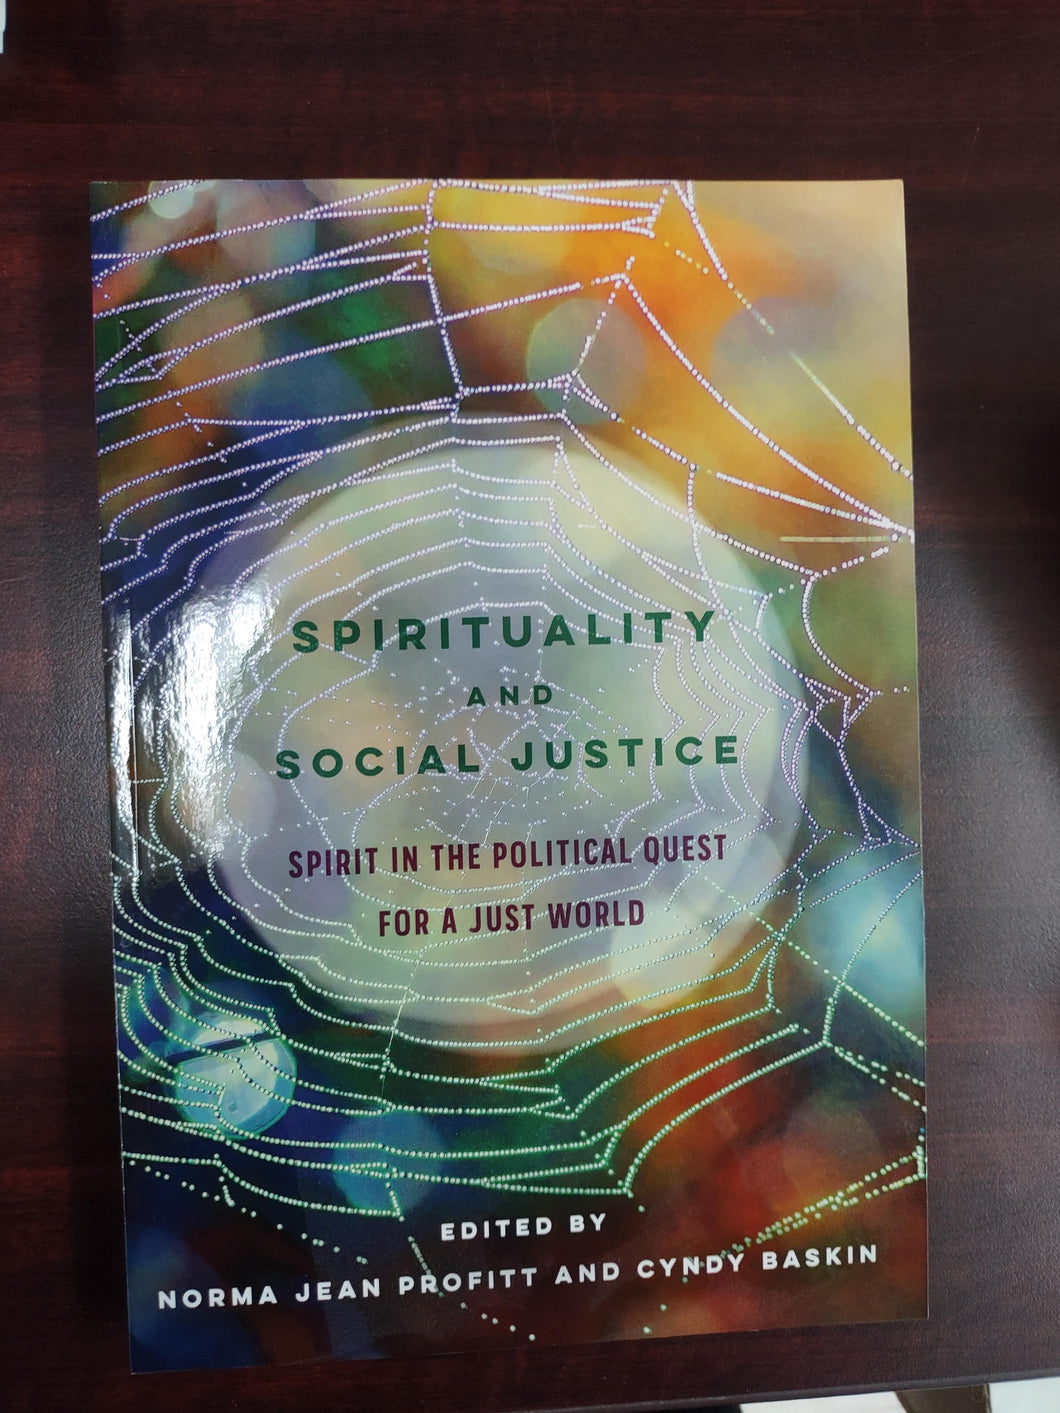 Spirituality & Social Justice-Spirit in the Political Quest for a Just World